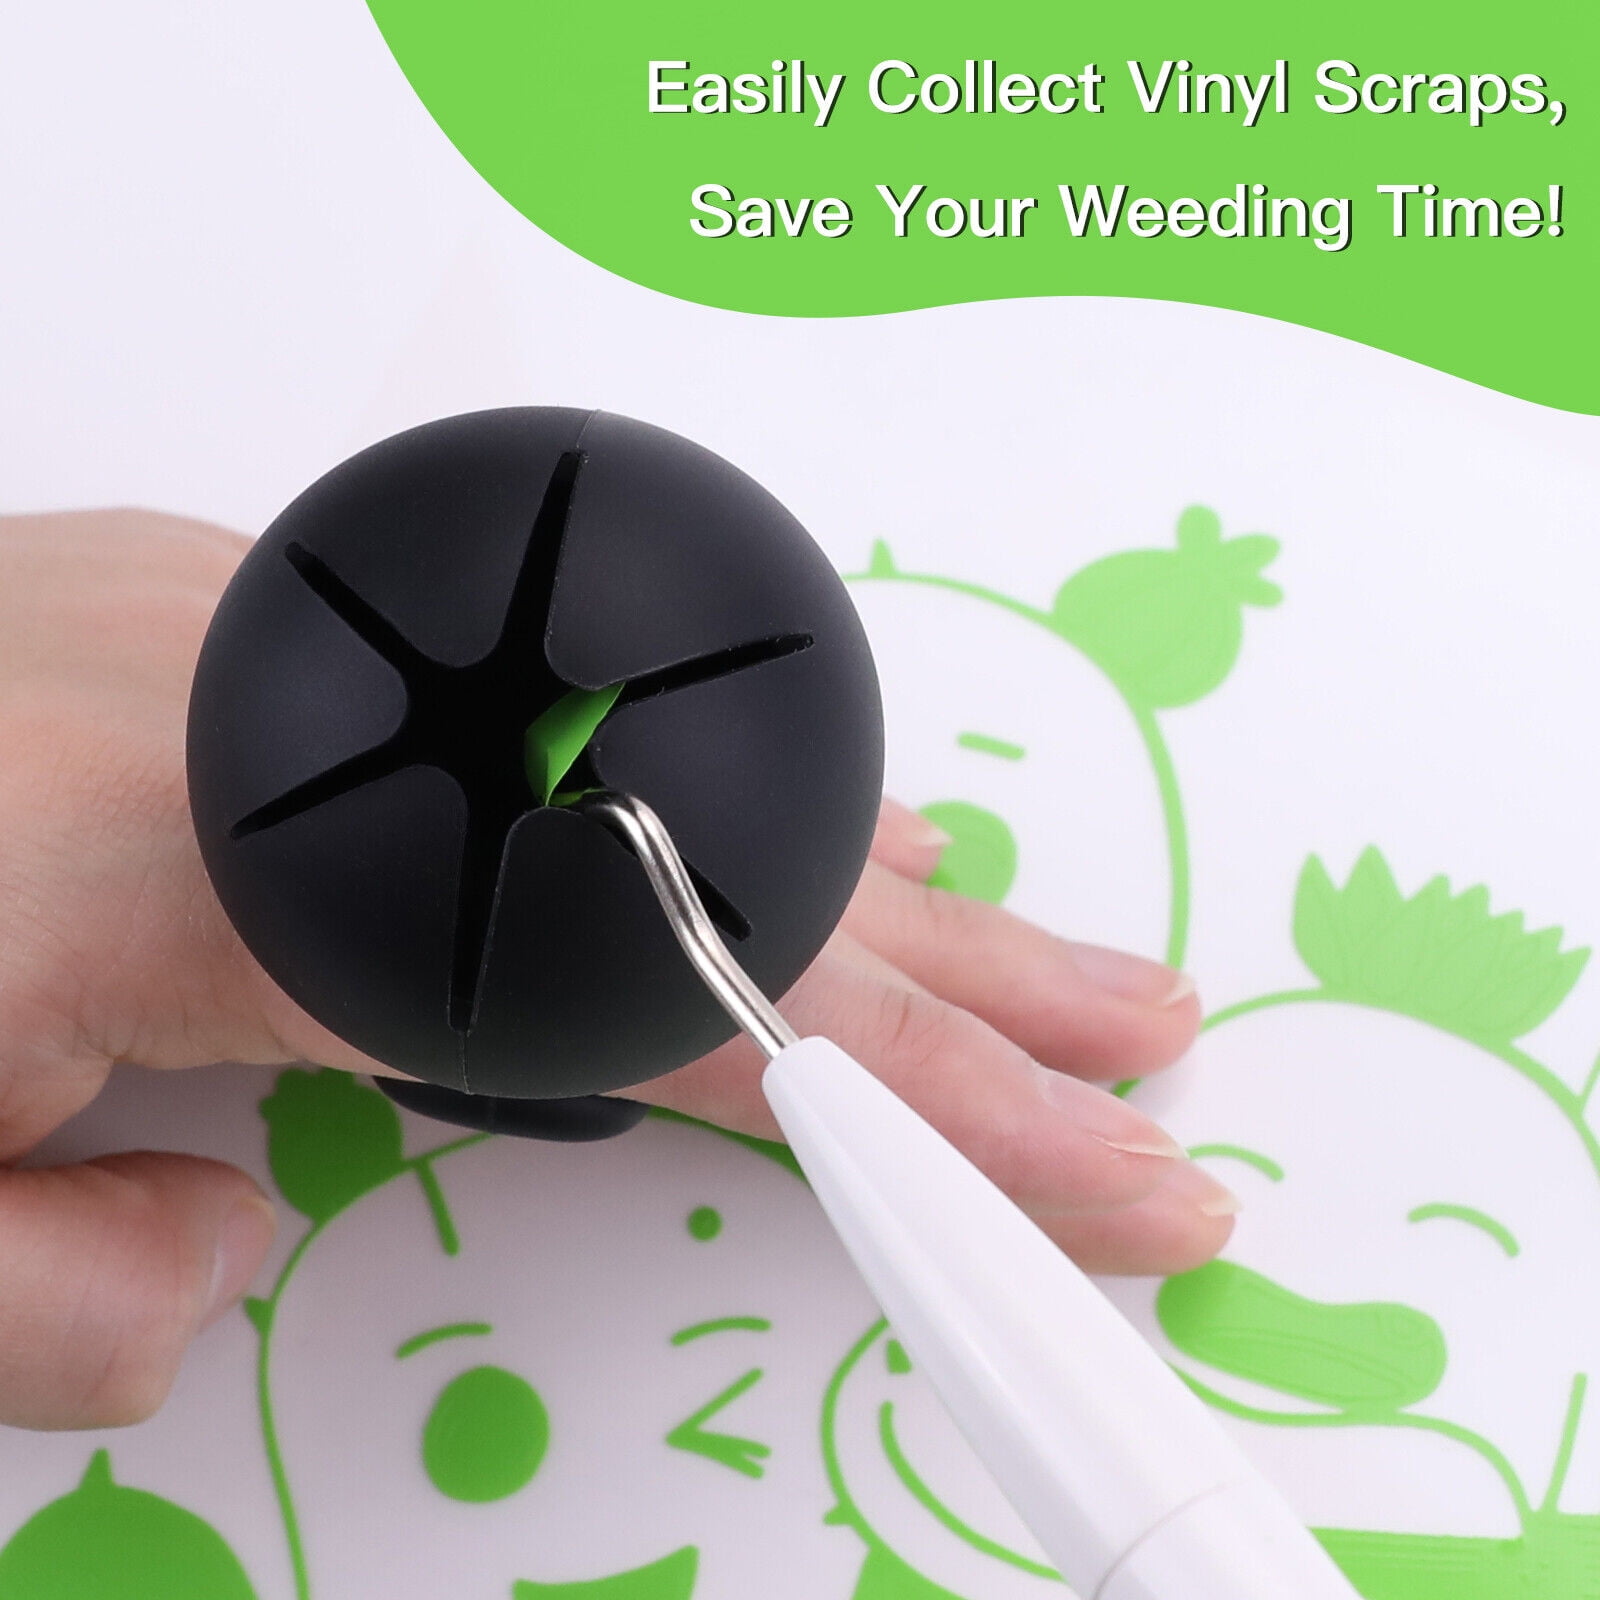 2x Suctioned Vinyl Wrapping Weeding Cricut Scrap Collector Silicone Suction  Cup